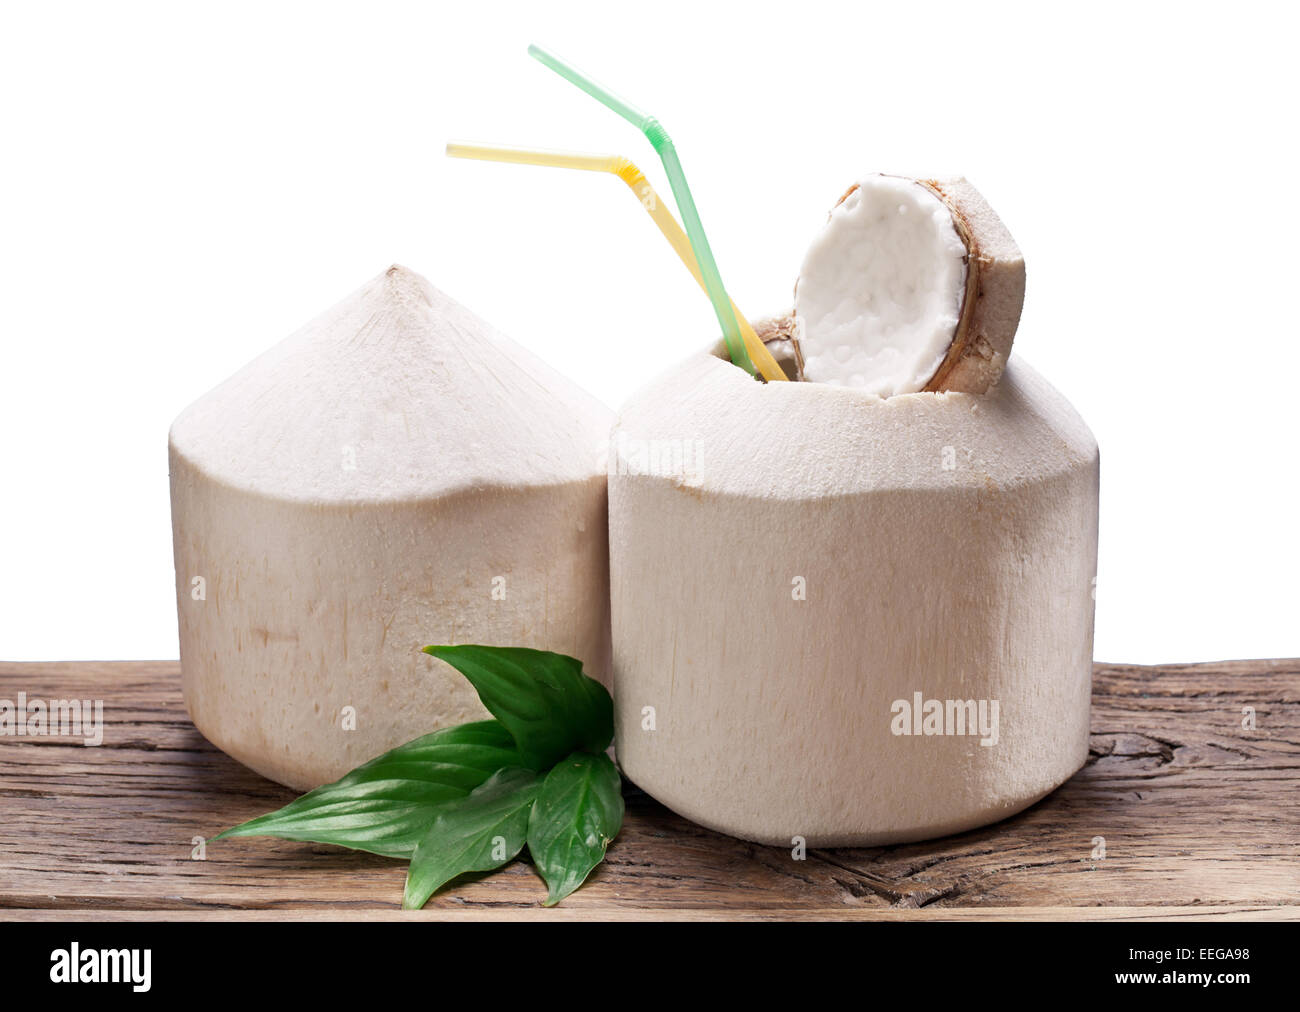 Coconut water in the nut. File contains clipping paths. Stock Photo